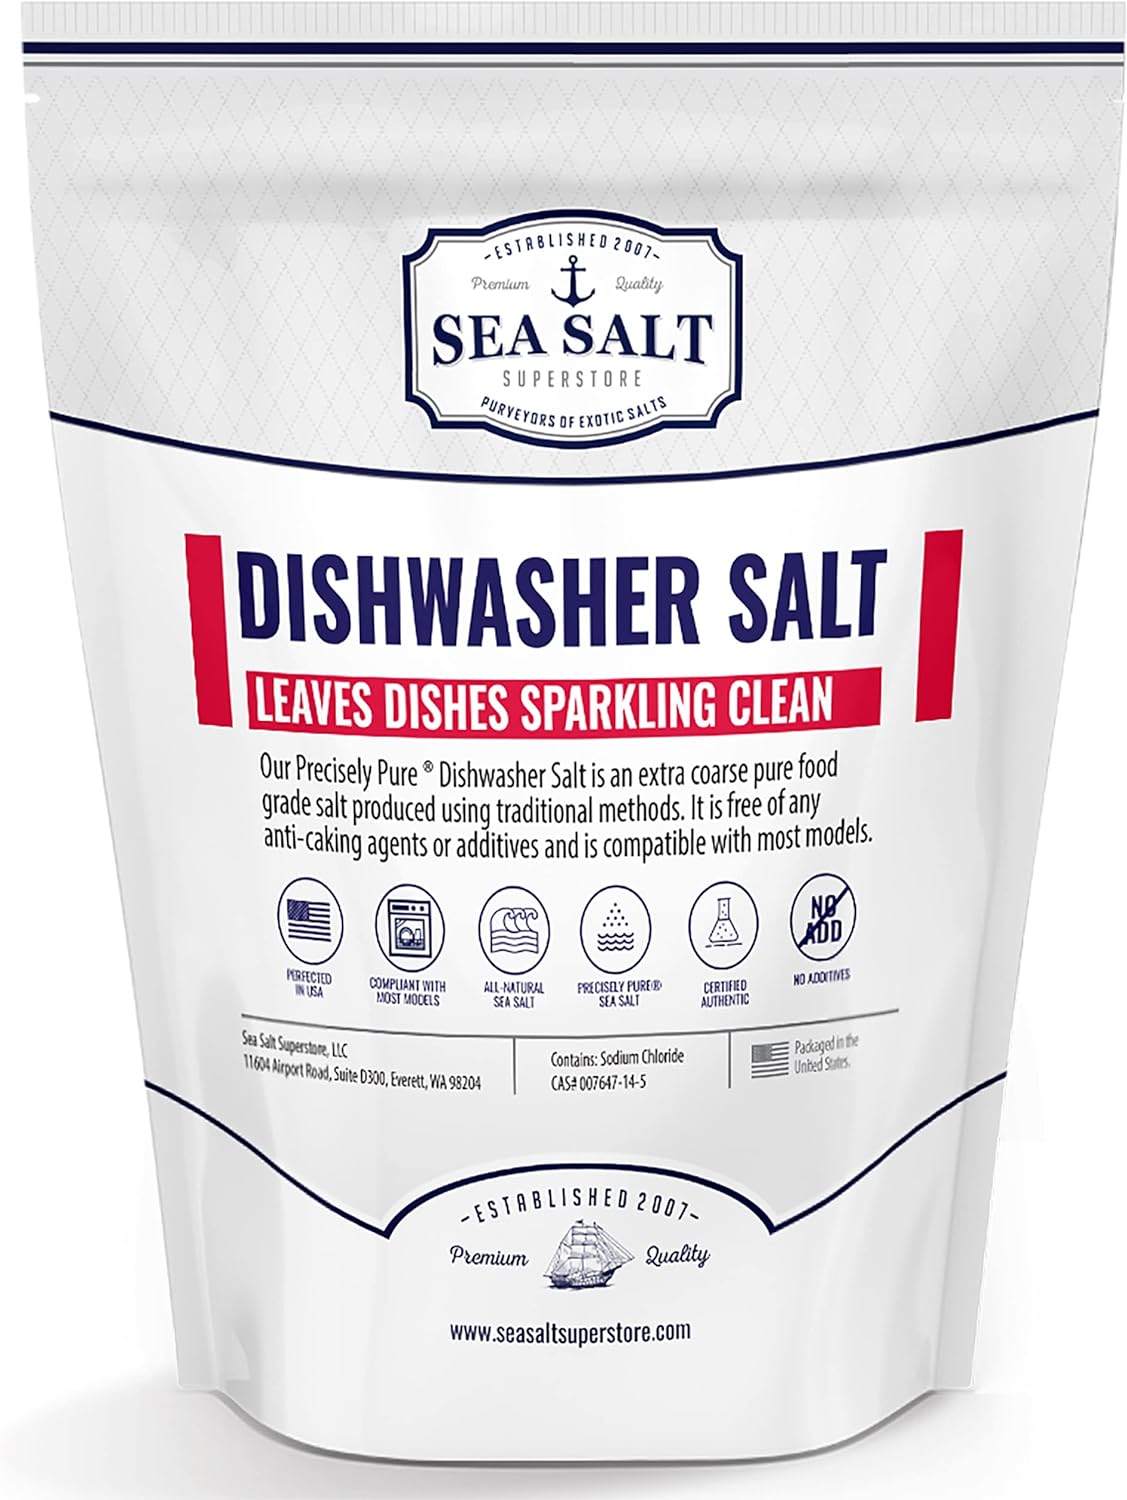 Dishwasher Salt - All-Natural Water Softener Salt for a Clean Finish - Compatible with Bosch, Miele, Thermador, Whirlpool Dishwashers and More - Food-Grade Coarse Sea Salt (5 lb Bag)